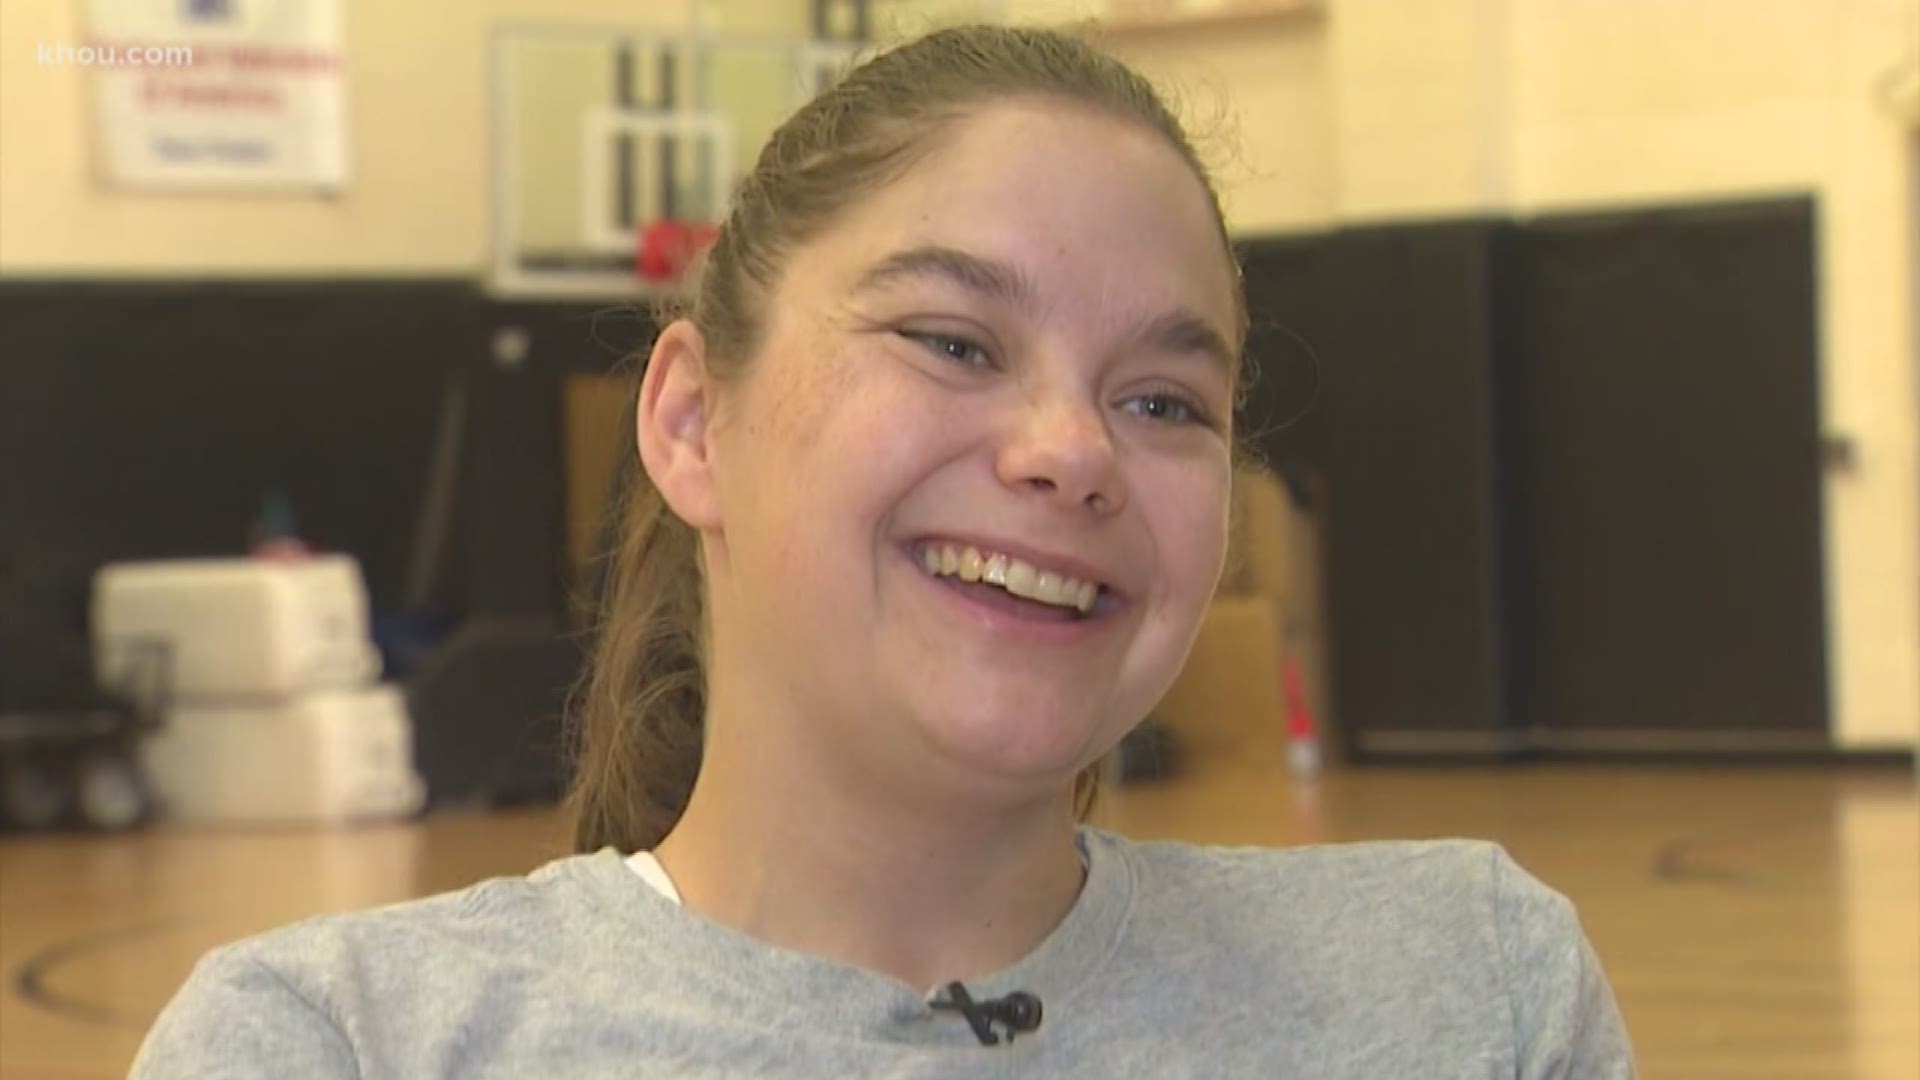 Seven years ago, we profiled a young woman who received a scholarship to play wheelchair basketball at the University of Illinois. Now, we're back with Kaitlyn Eaton, and the new team she's suiting up for.